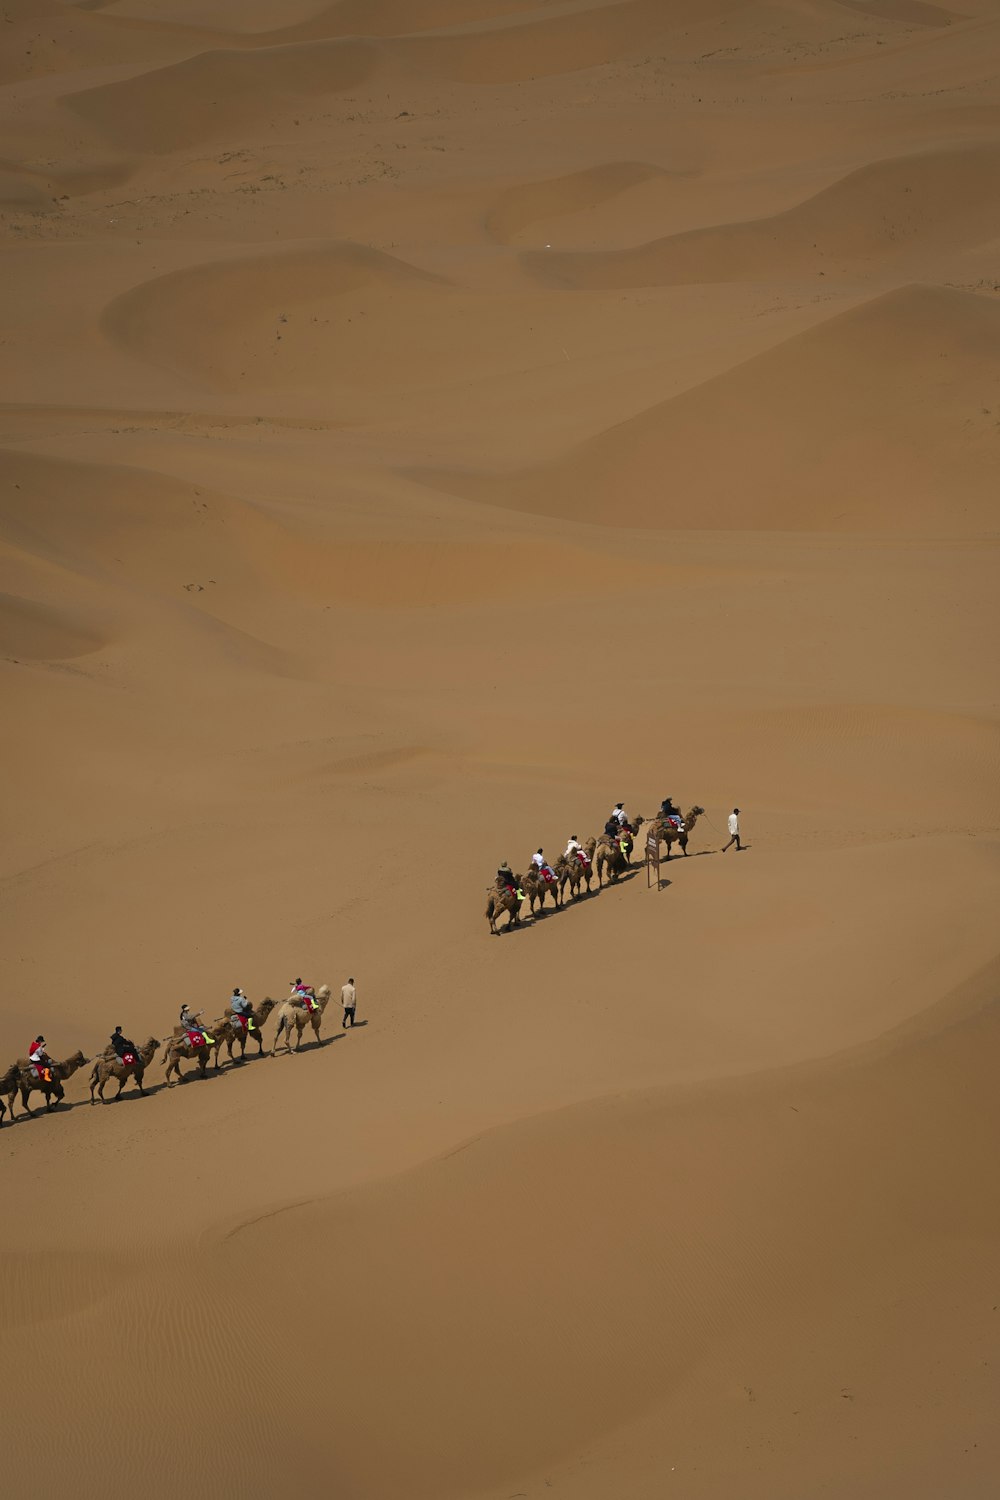 a group of people riding horses across a desert